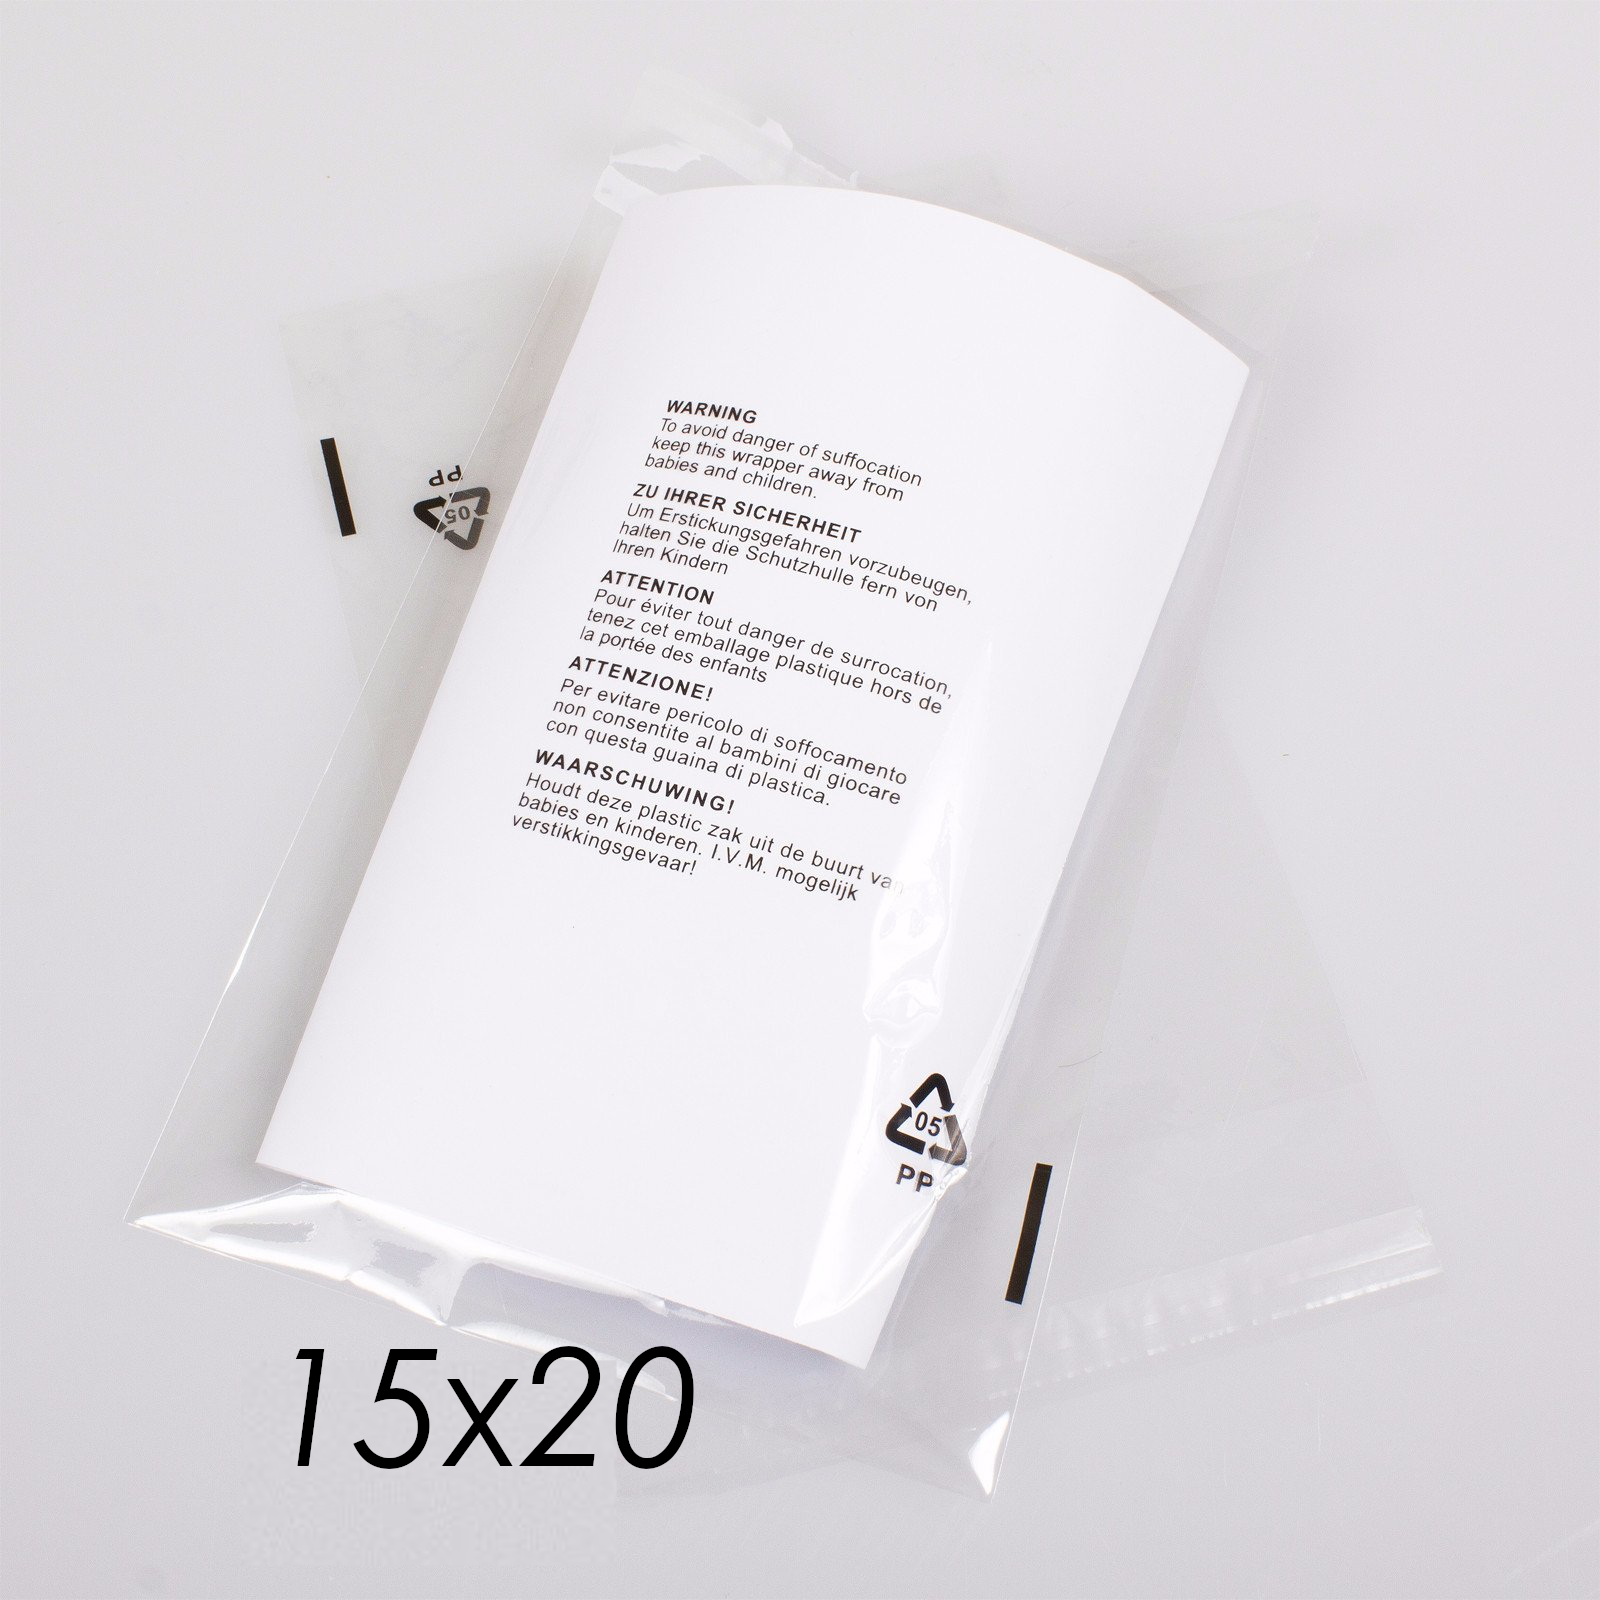 15X20" CPP Transparent Packaging Bag with Warning Labels Printed,SR Mailing,